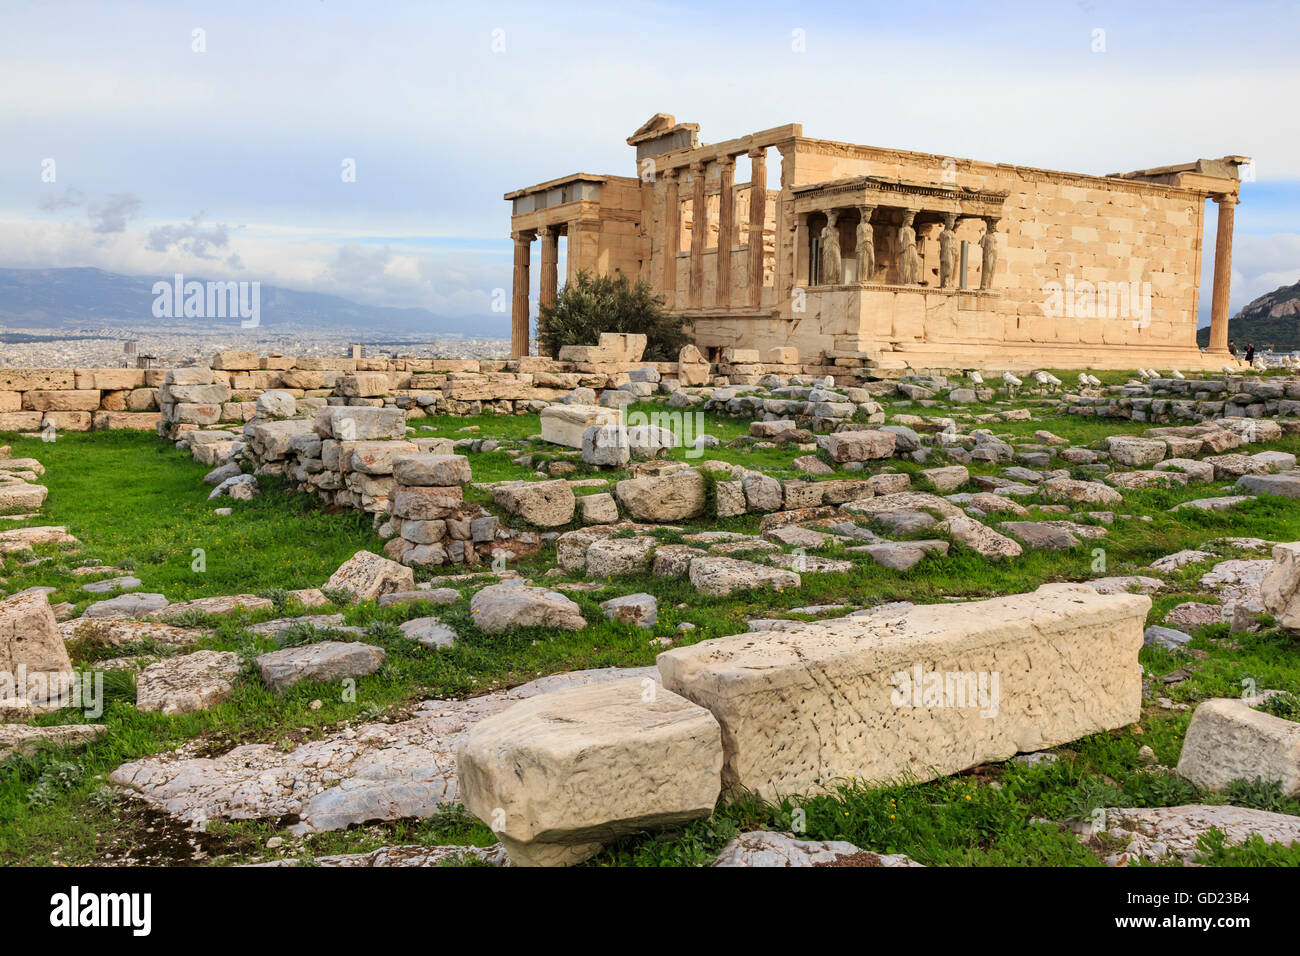 Erechtheion, with Porch of the maidens or Caryatids, Acropolis, UNESCO World Heritage Site, Athens, Greece, Europe Stock Photo